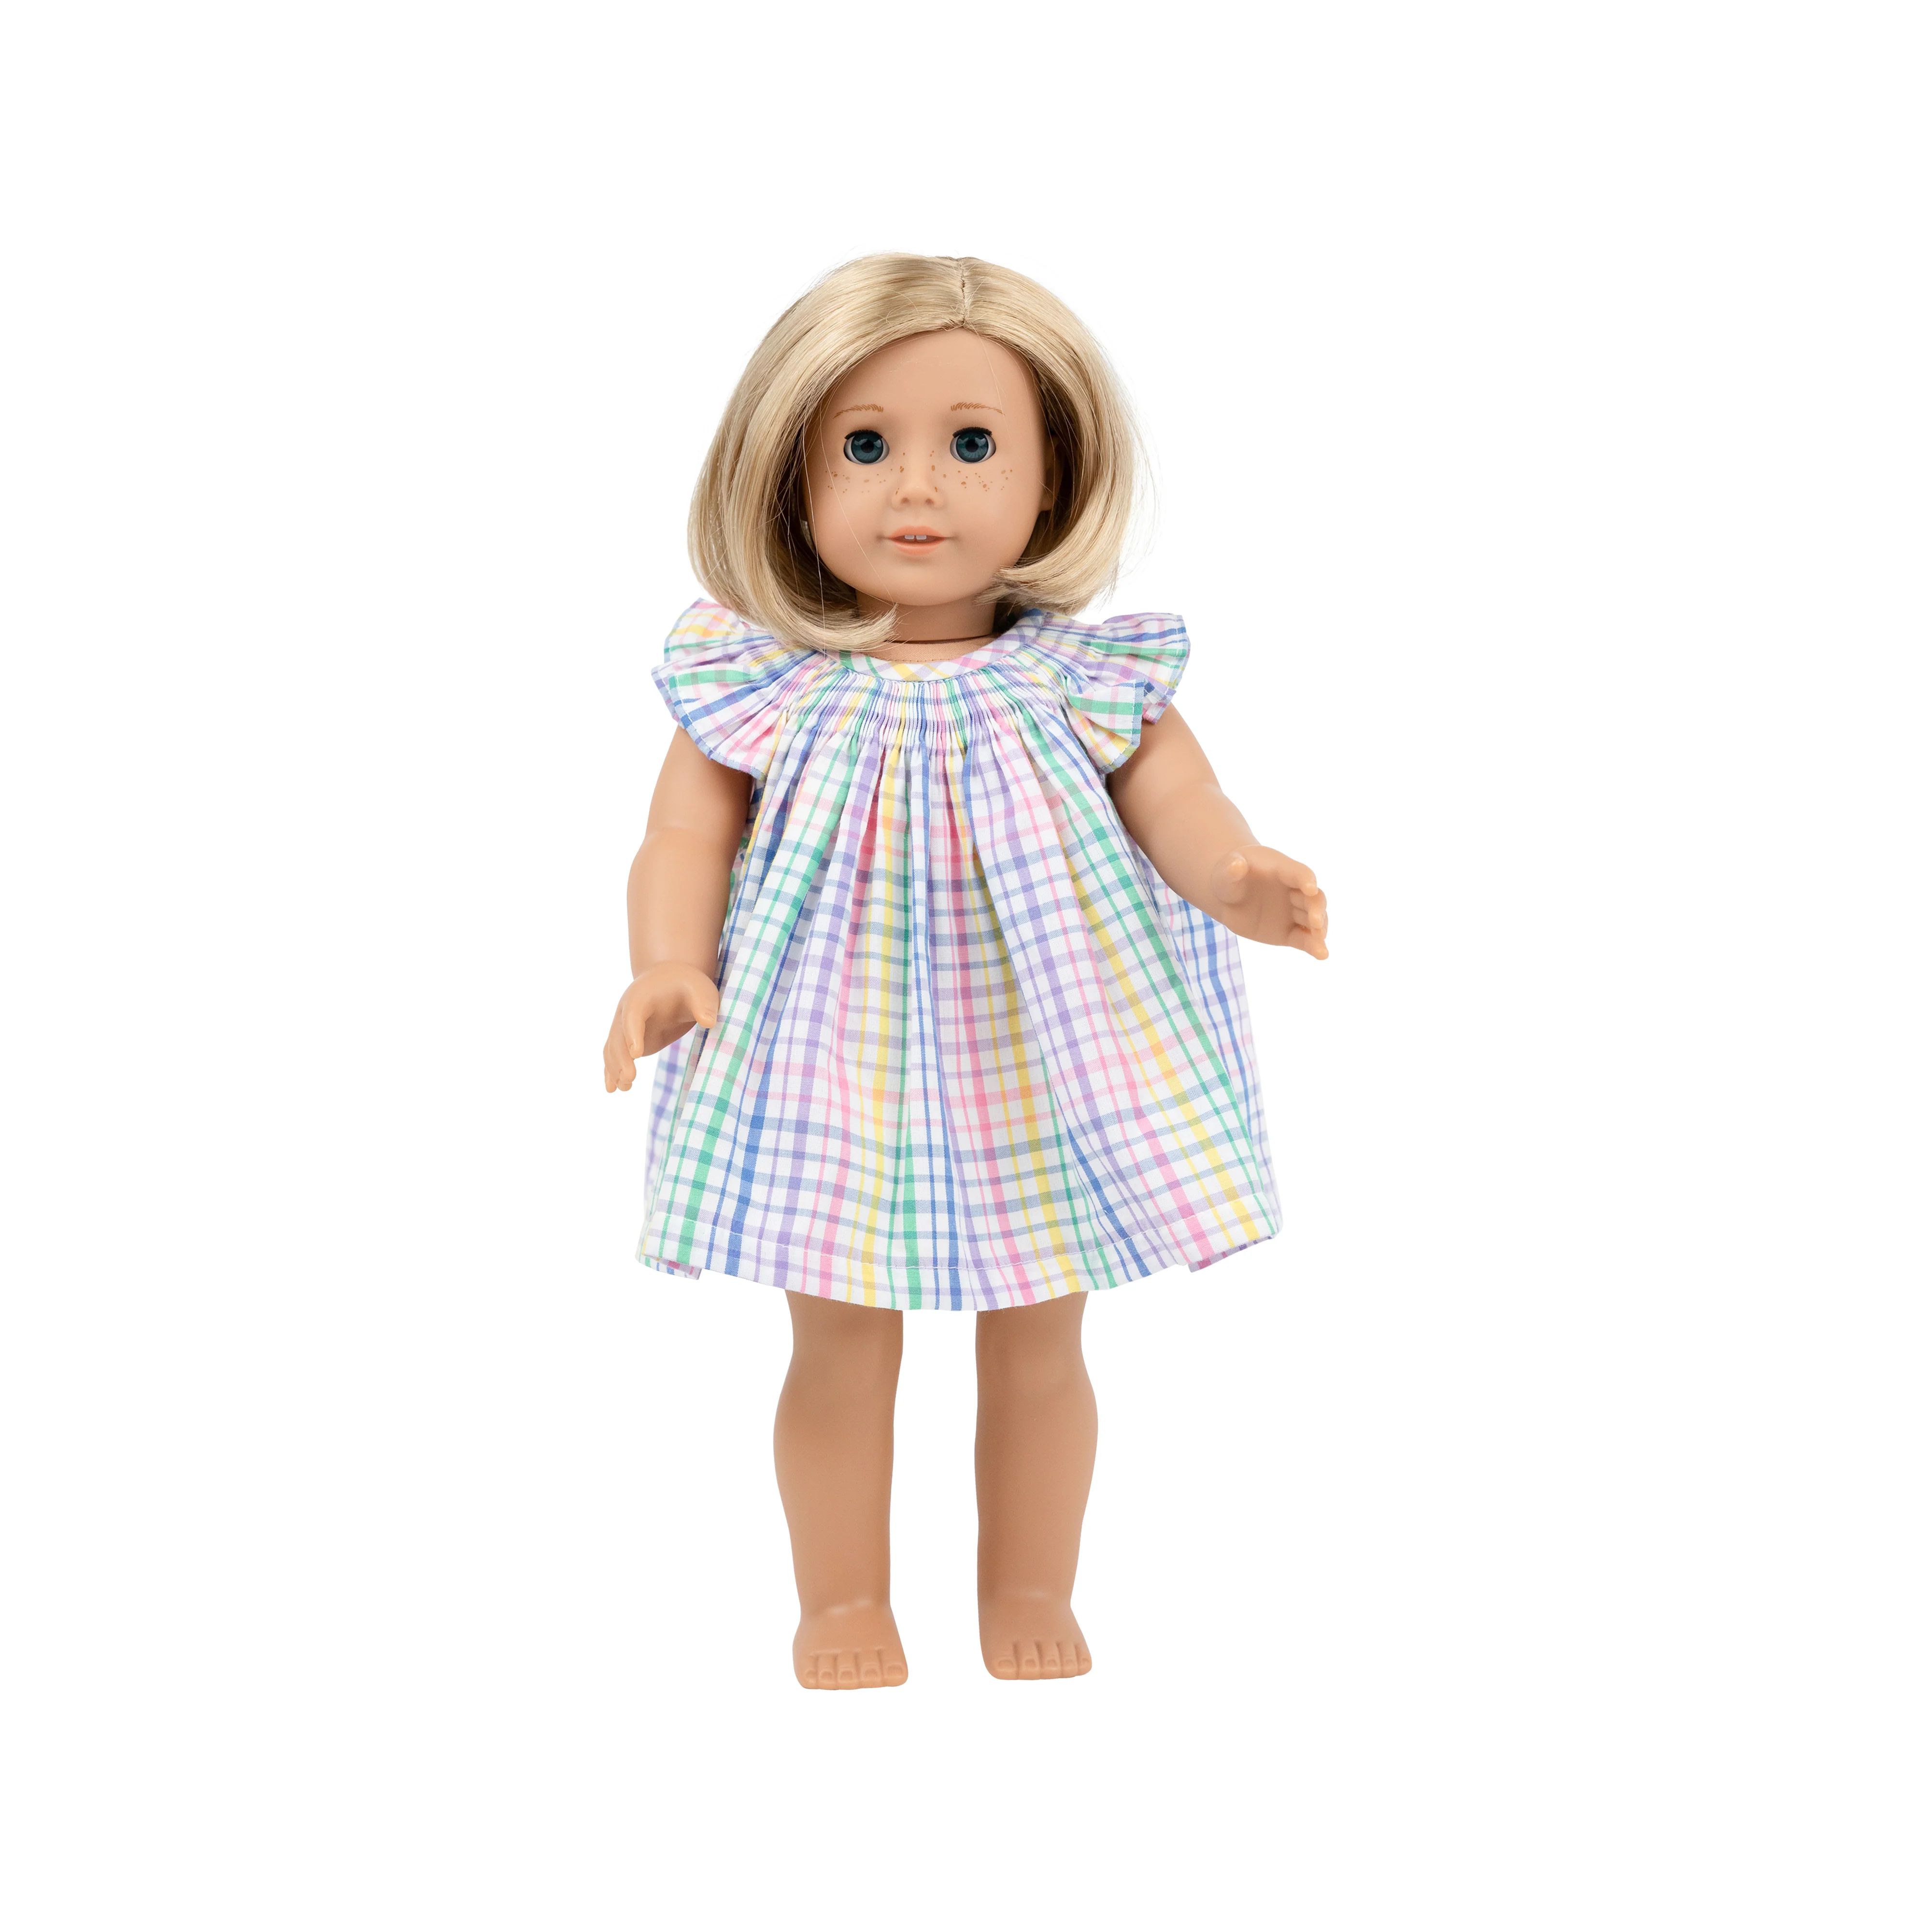 Dolly's Angel Sleeve Sandy Smocked Dress - Colored Pens Plaid with Worth Avenue White | The Beaufort Bonnet Company